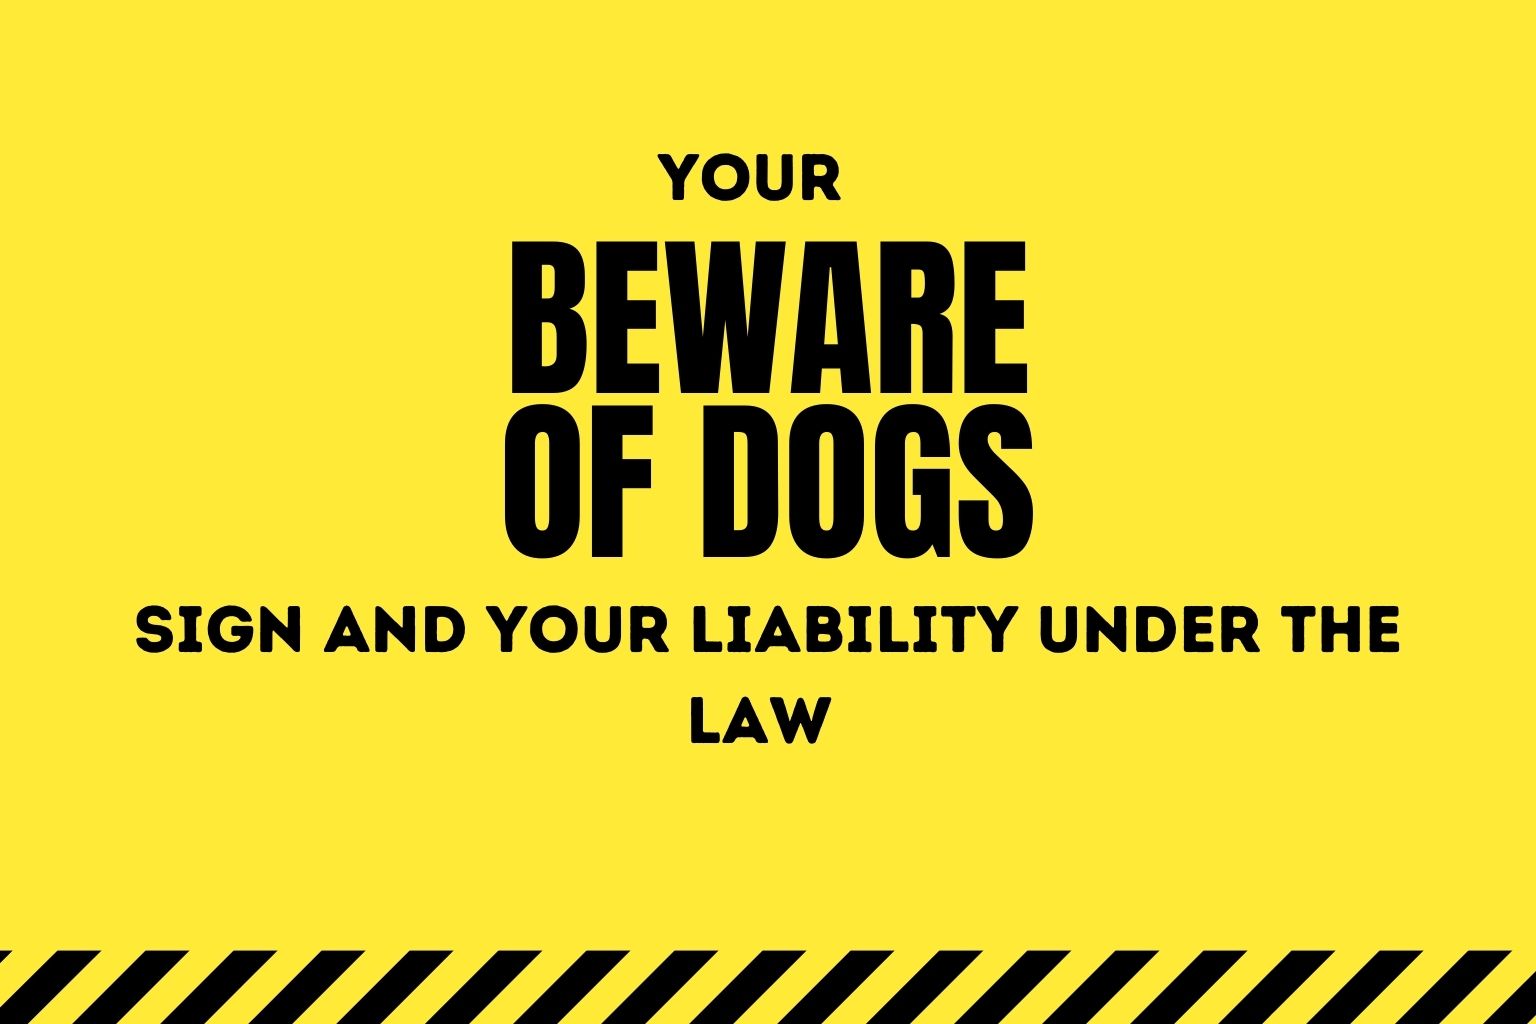 Your “Beware of Dog” Sign and Your Liability Under the Law